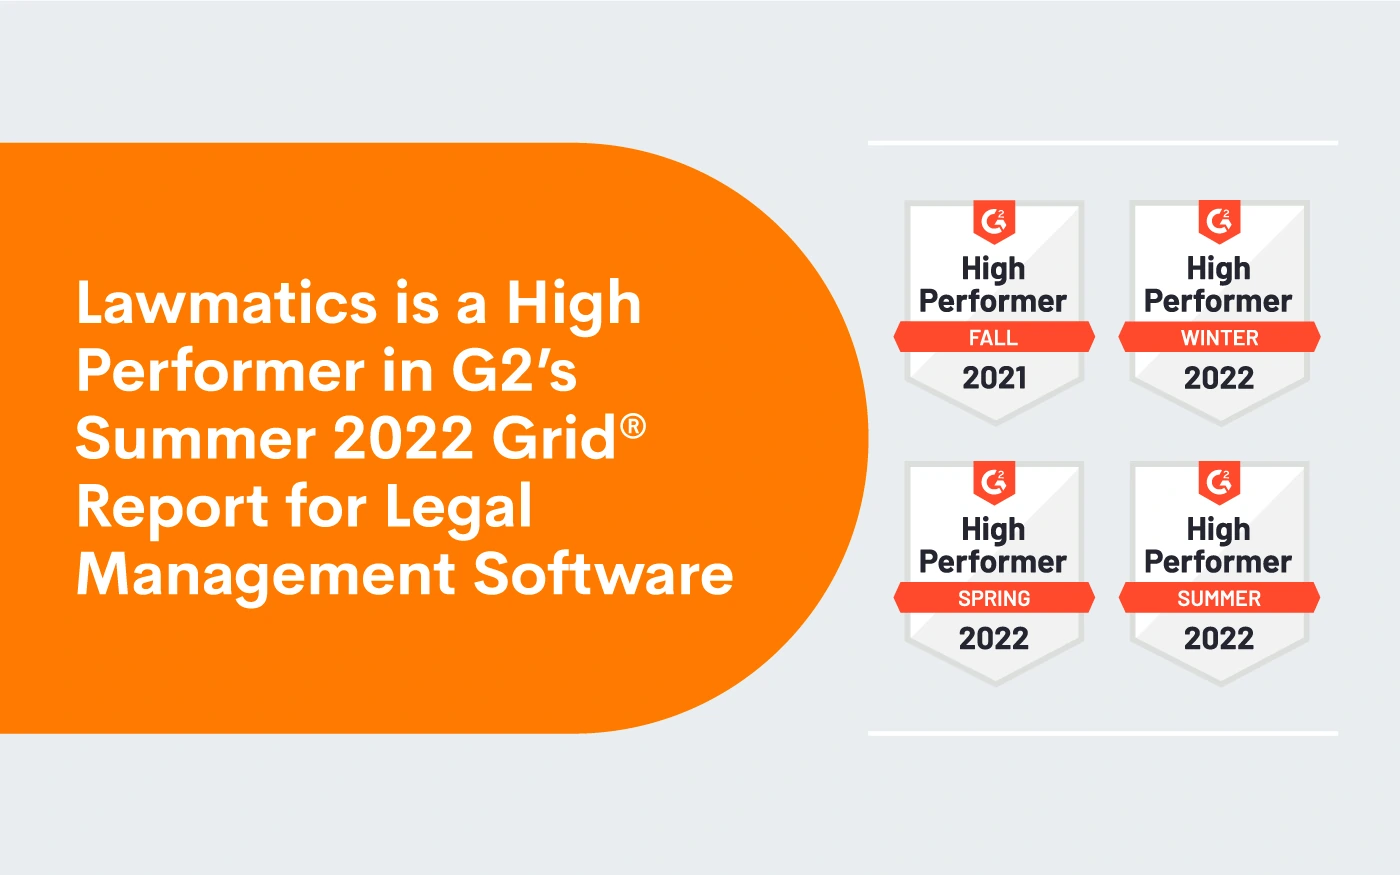 Lawmatics is a High Performer in G2’s Summer 2022 Grid<sup>®</sup> Report for Legal Management Software